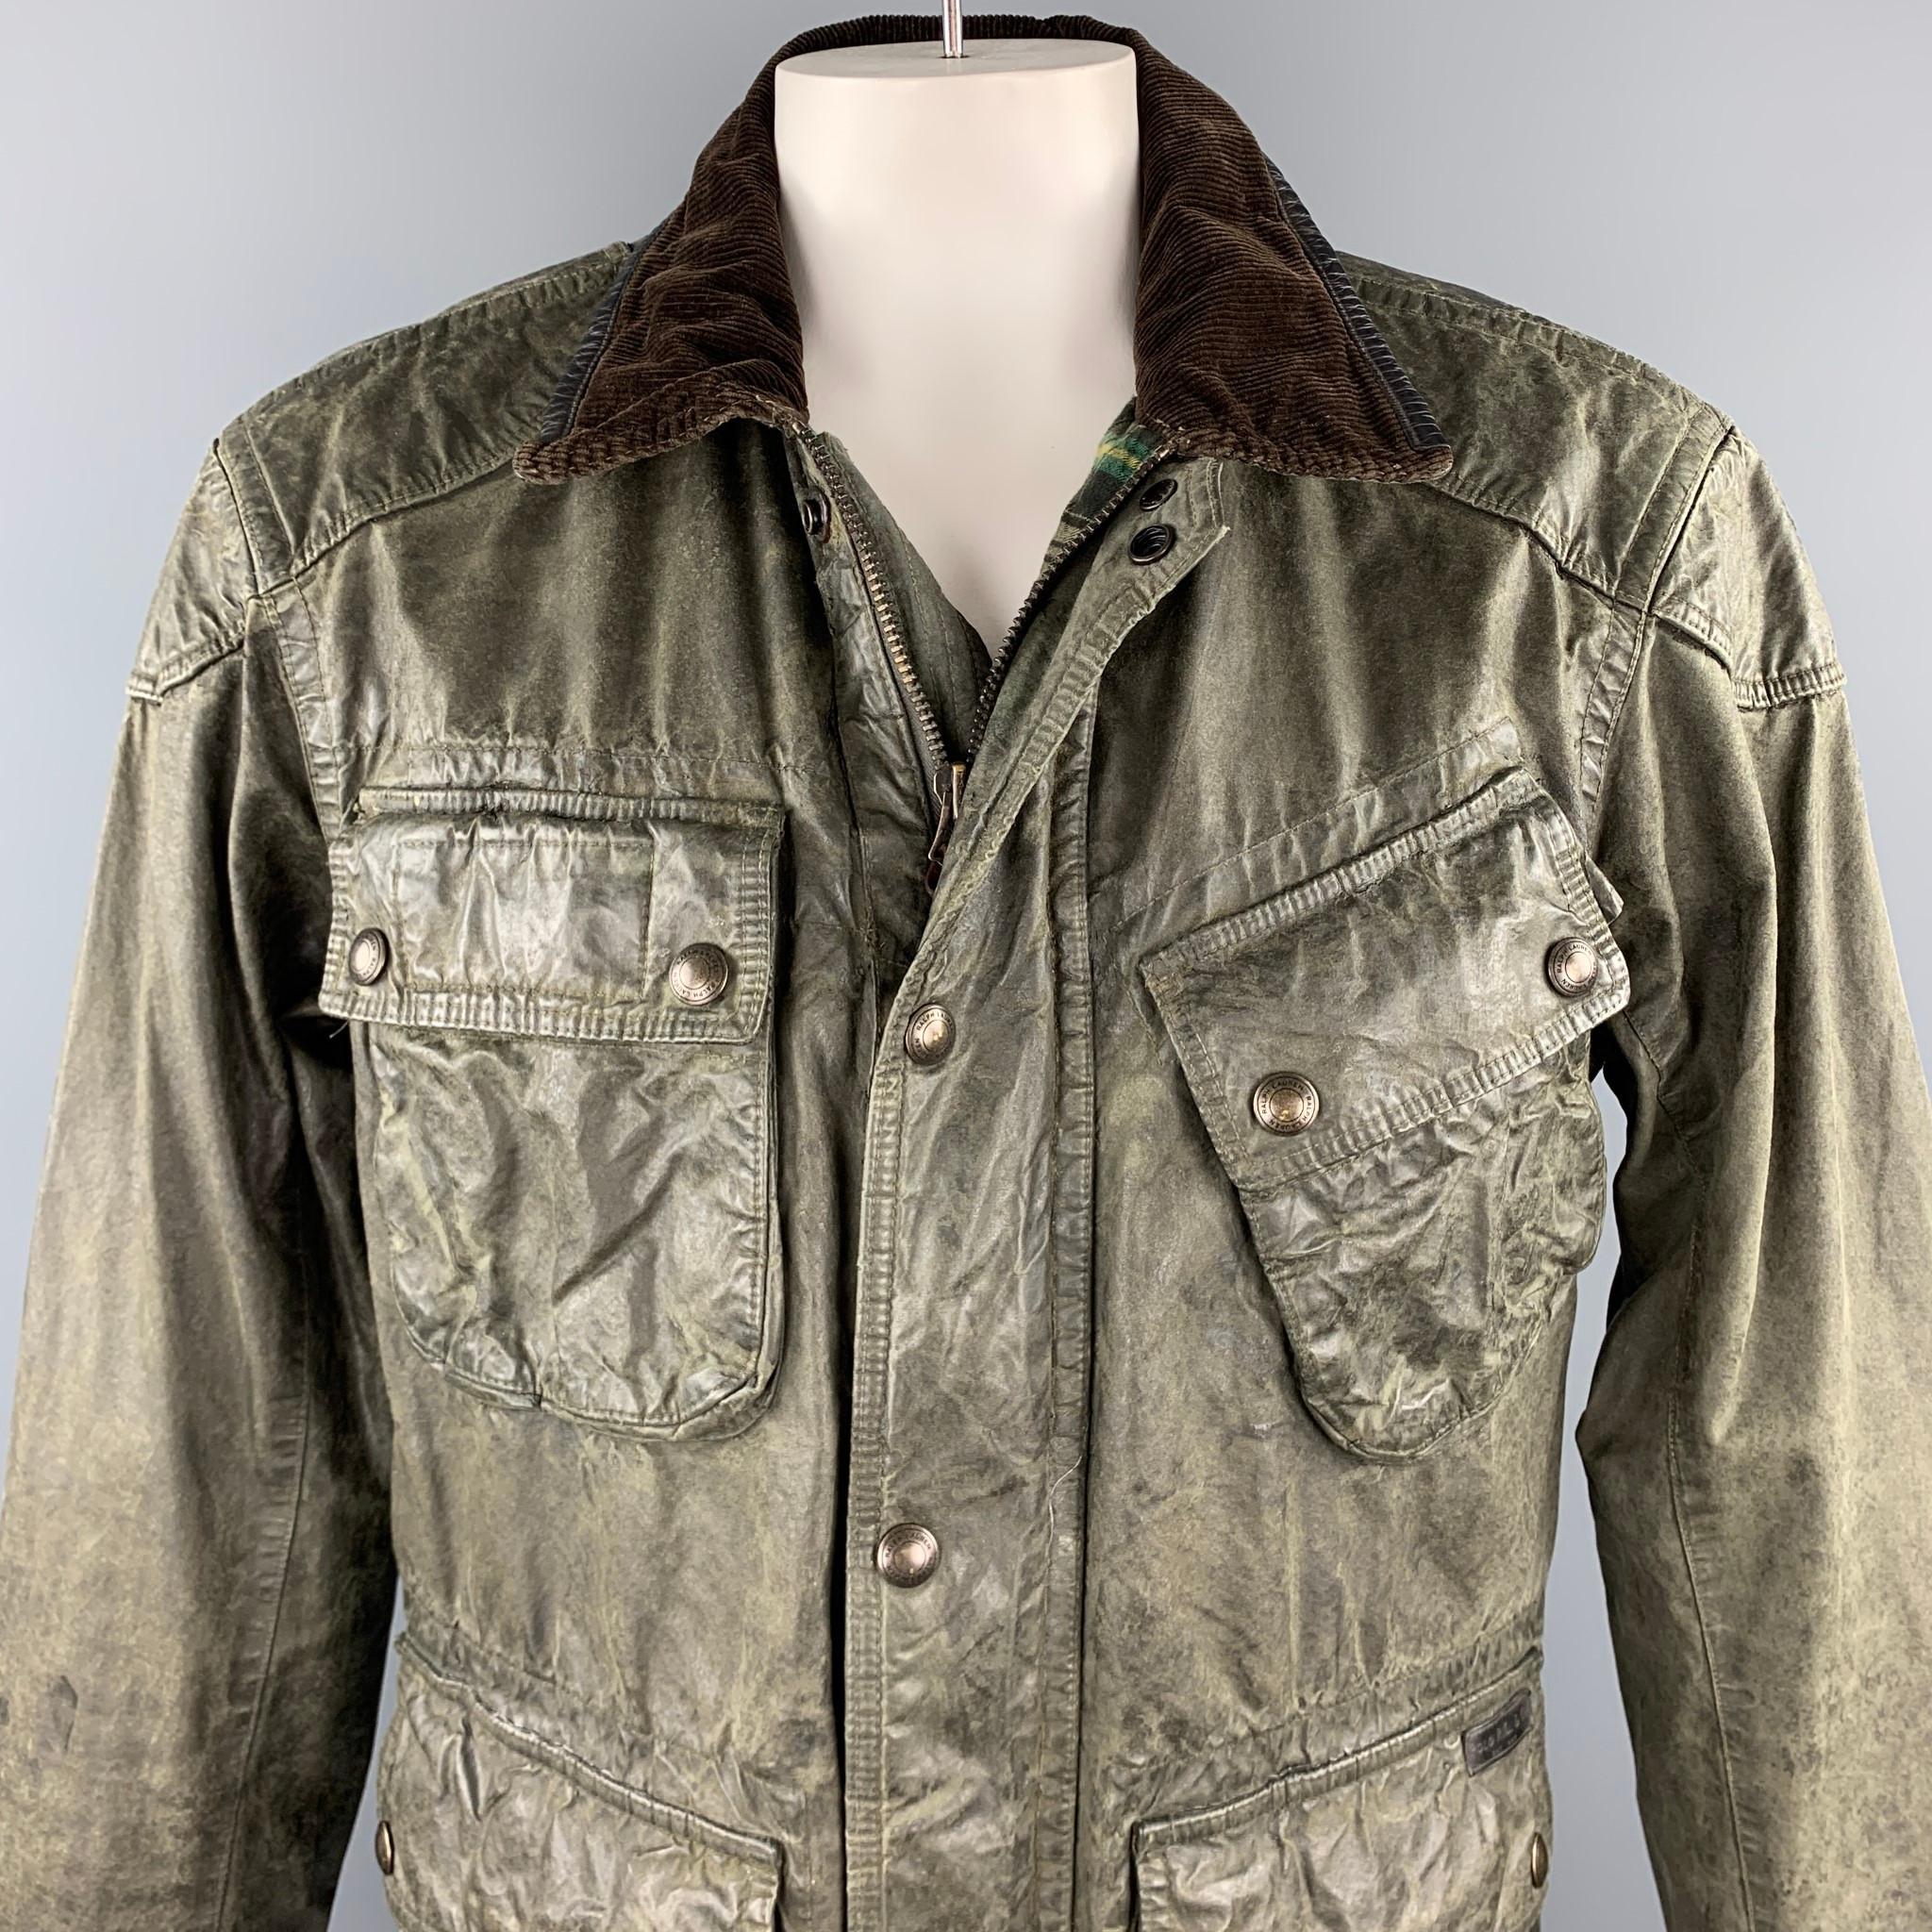 RALPH LAUREN jacket comes in a moss green coated cotton with a half plaid liner featuring snap button flap pockets, corduroy collar, strap details, and a zip and snap button closure. 

Good Pre-Owned Condition.
Marked:

Measurements:

Shoulder: 21